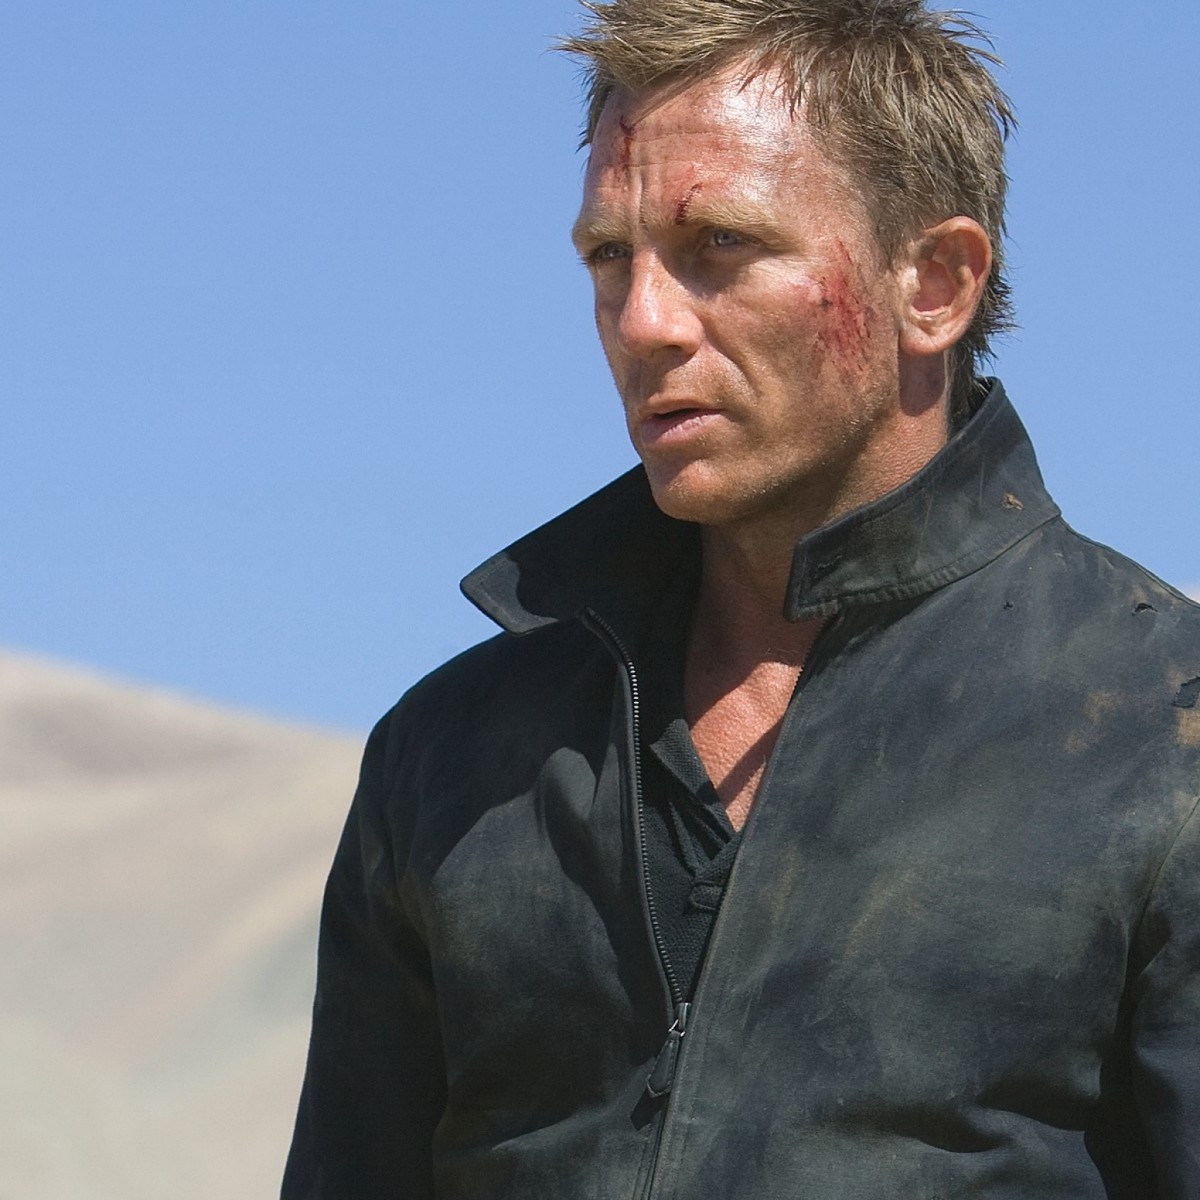 James Bond Is A Psychopath, According To Oxford Professor Kevin Dutton ...